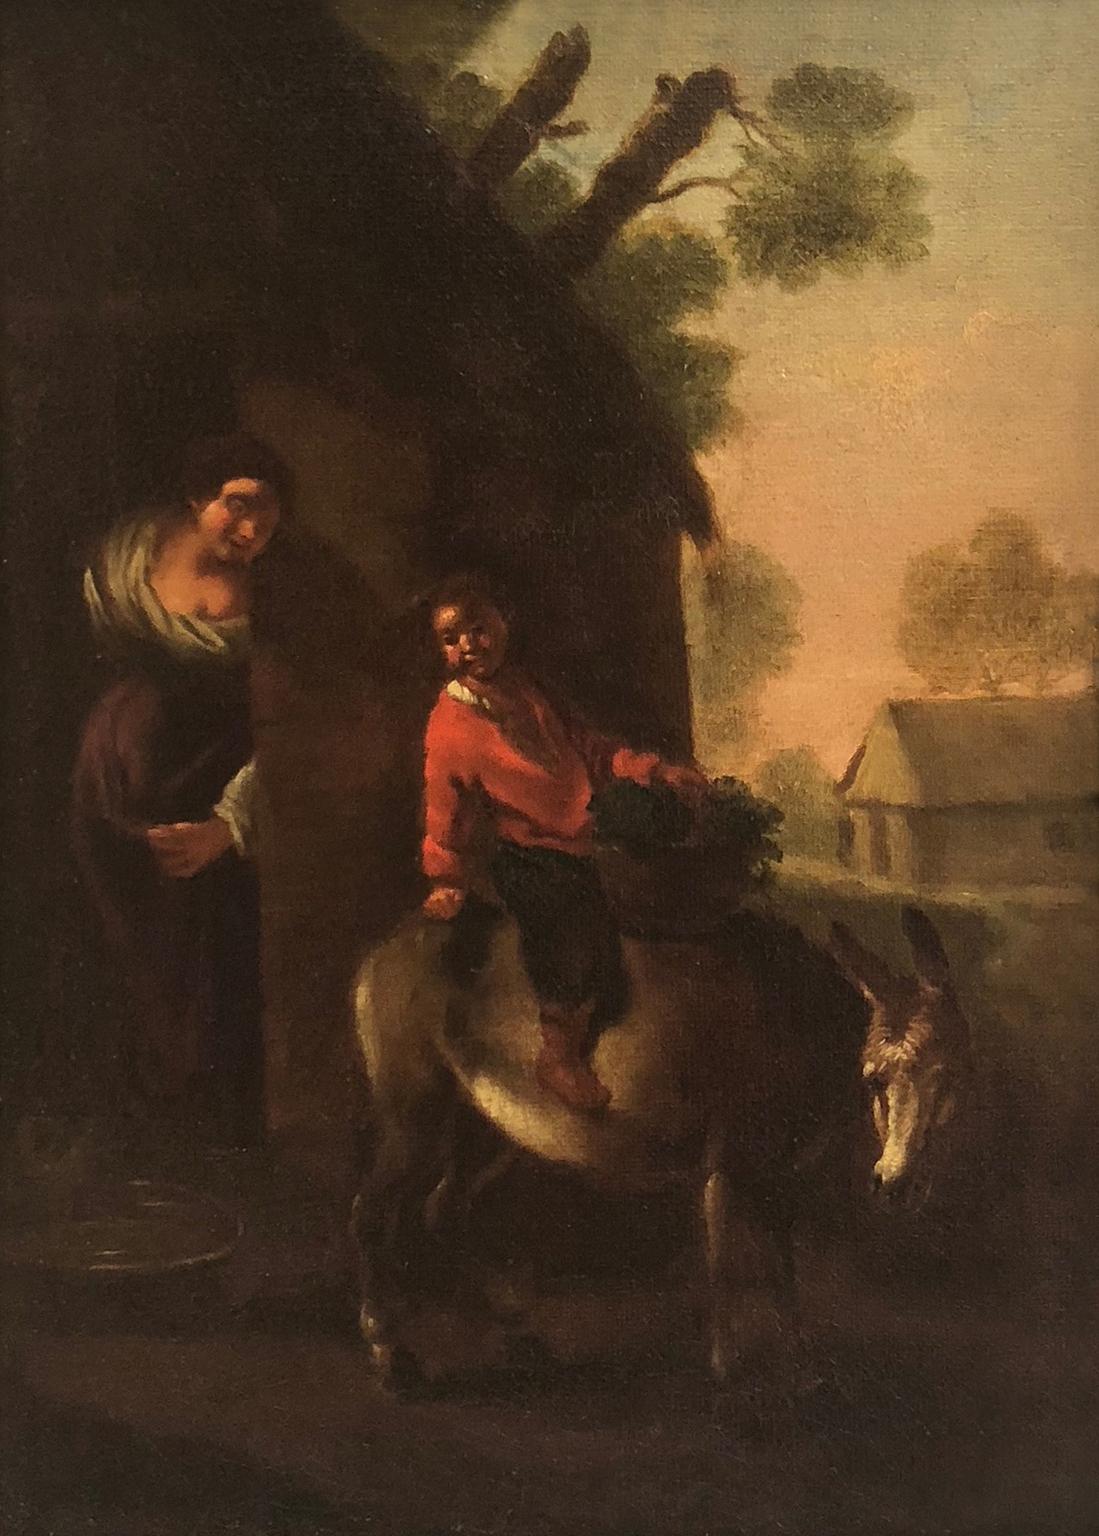 Boy on Donkey - Flemish School 17th Century - Painting by Unknown